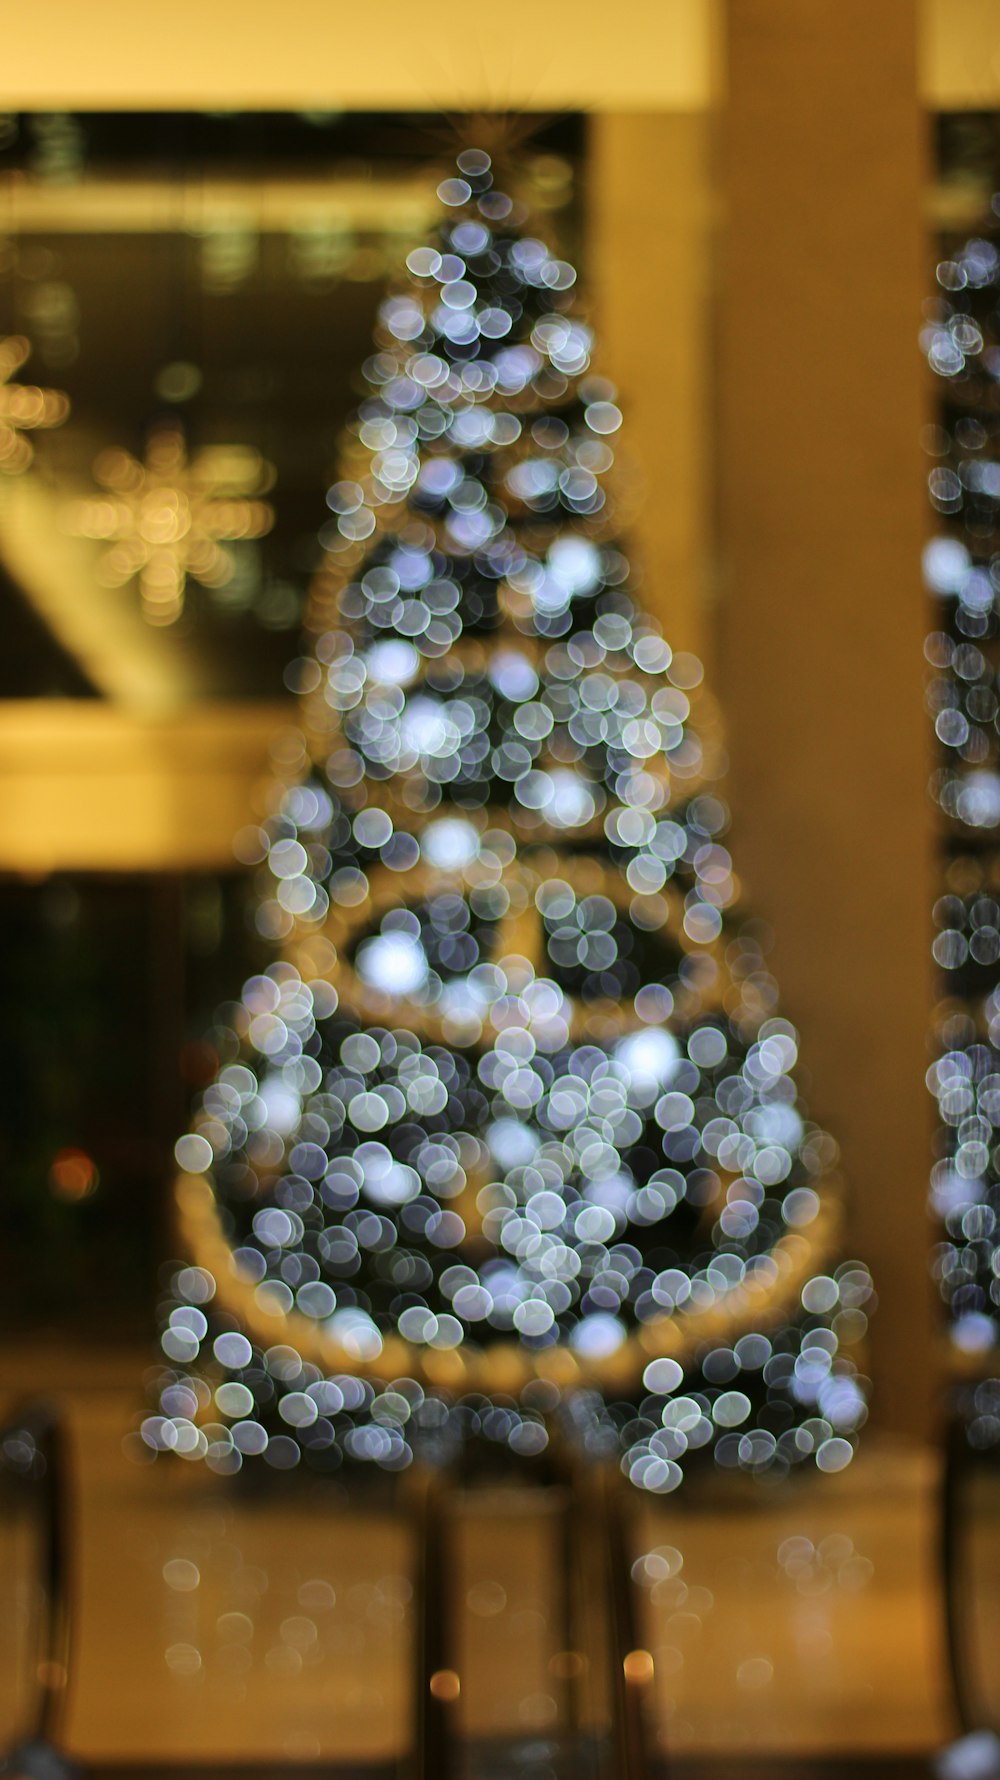 a lit up christmas tree in front of a building